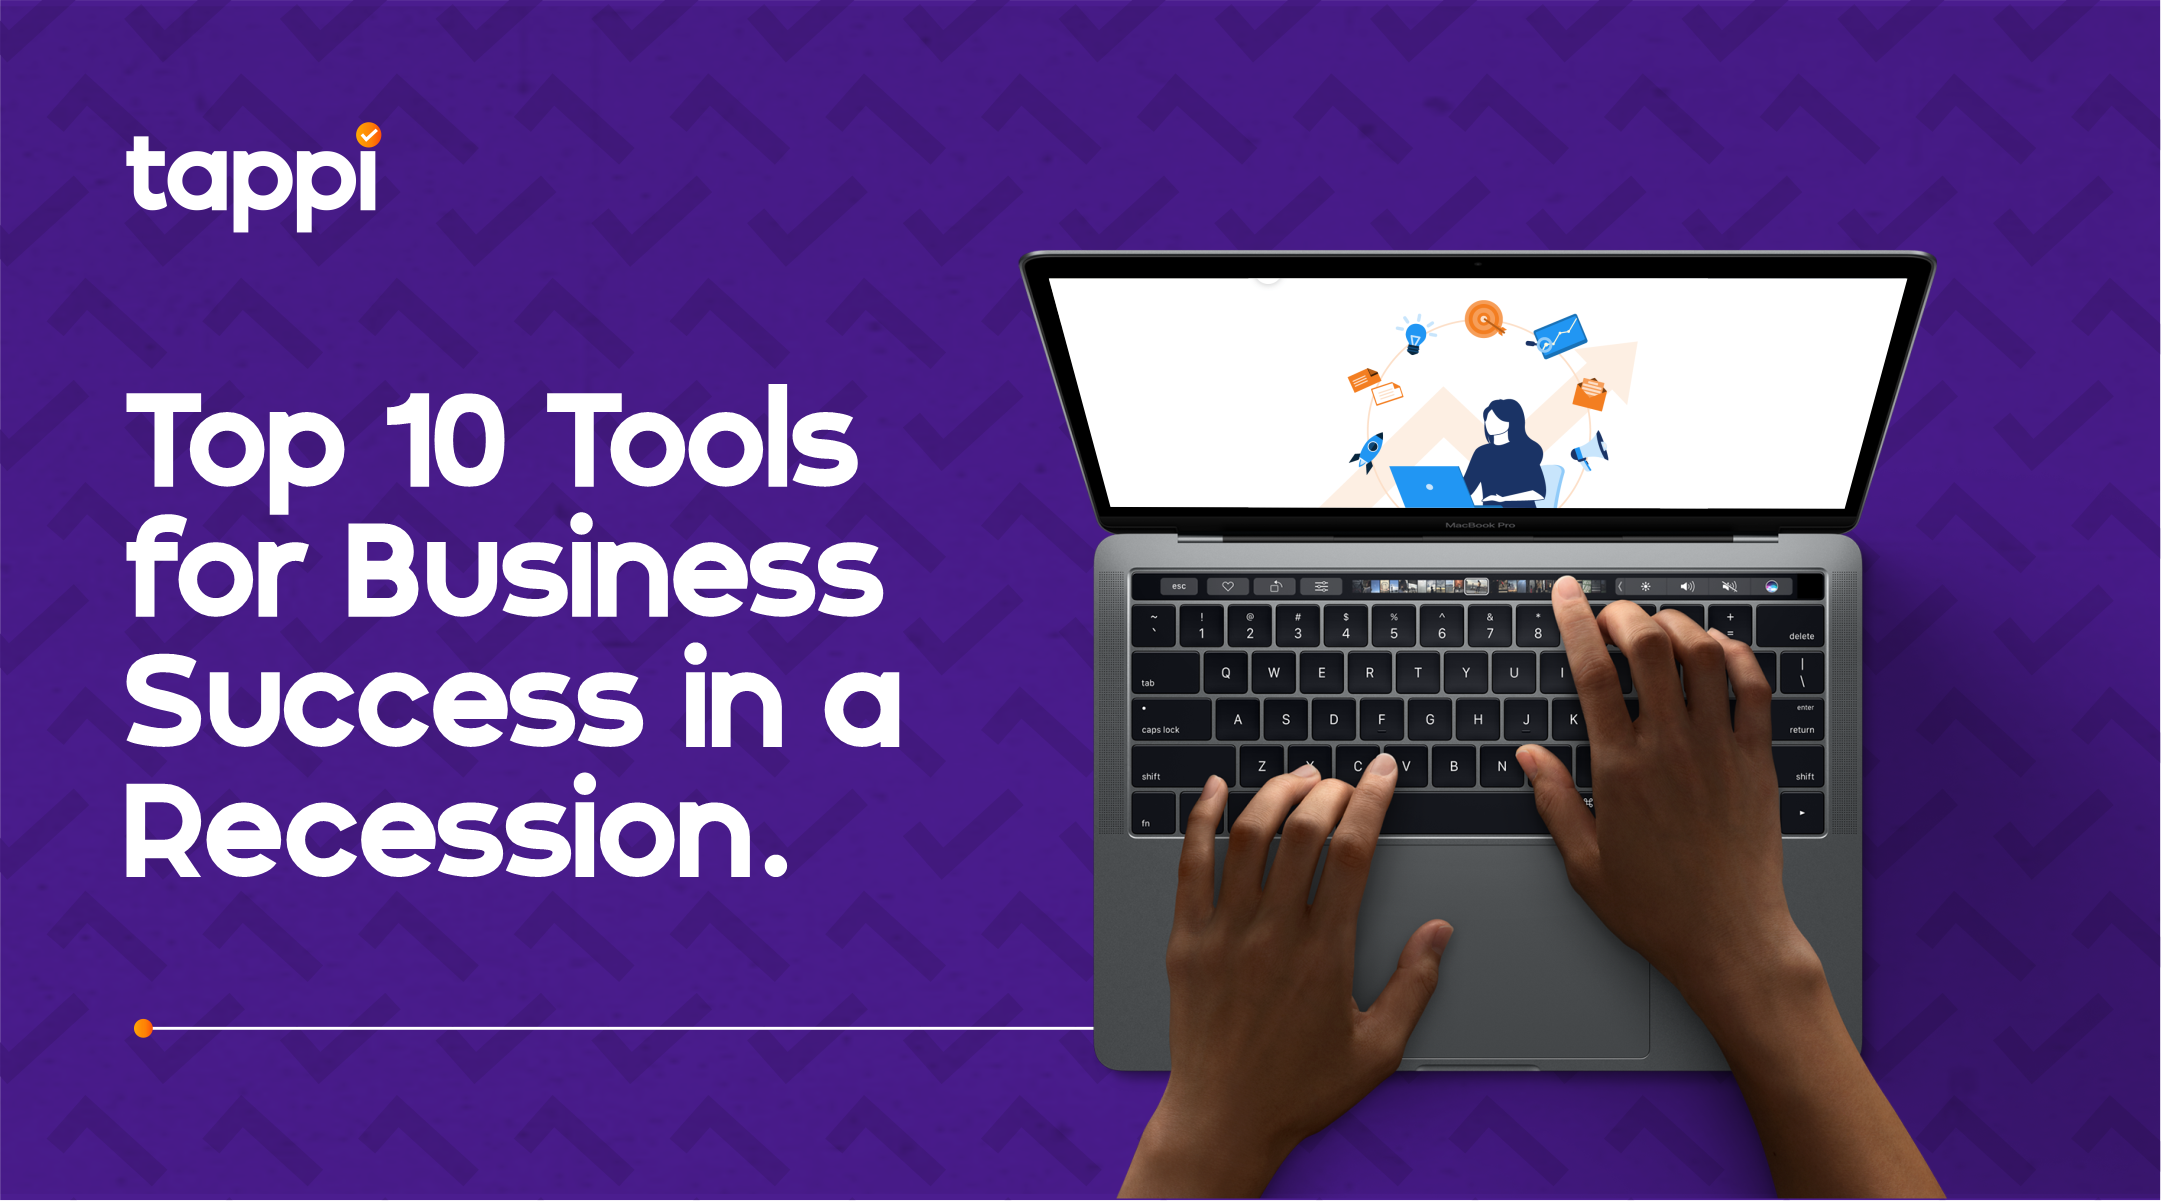 Top 10 Tools for Business Success in a Recession